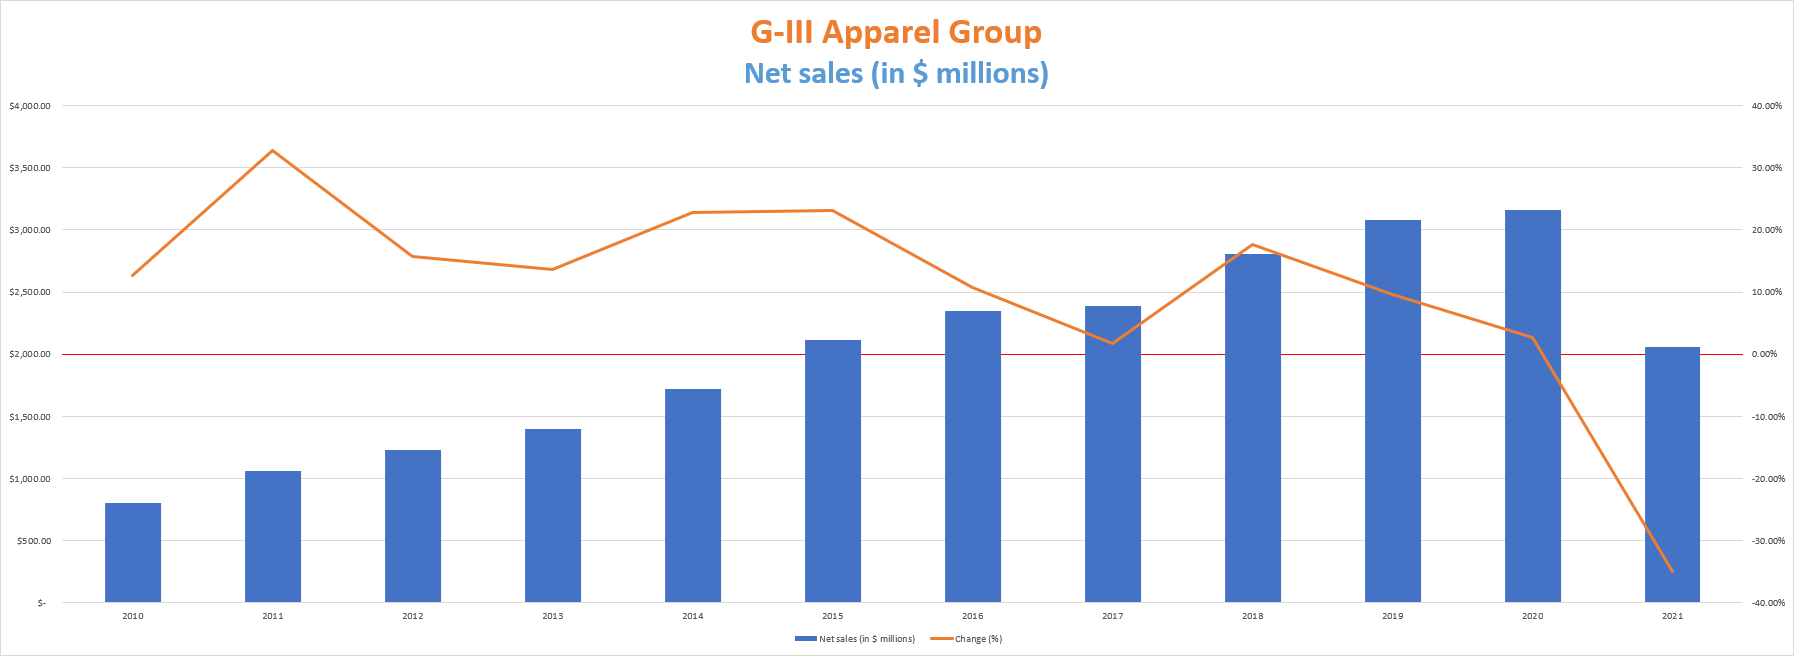 G-III Apparel Group: It's A Good Time To Start Averaging Down